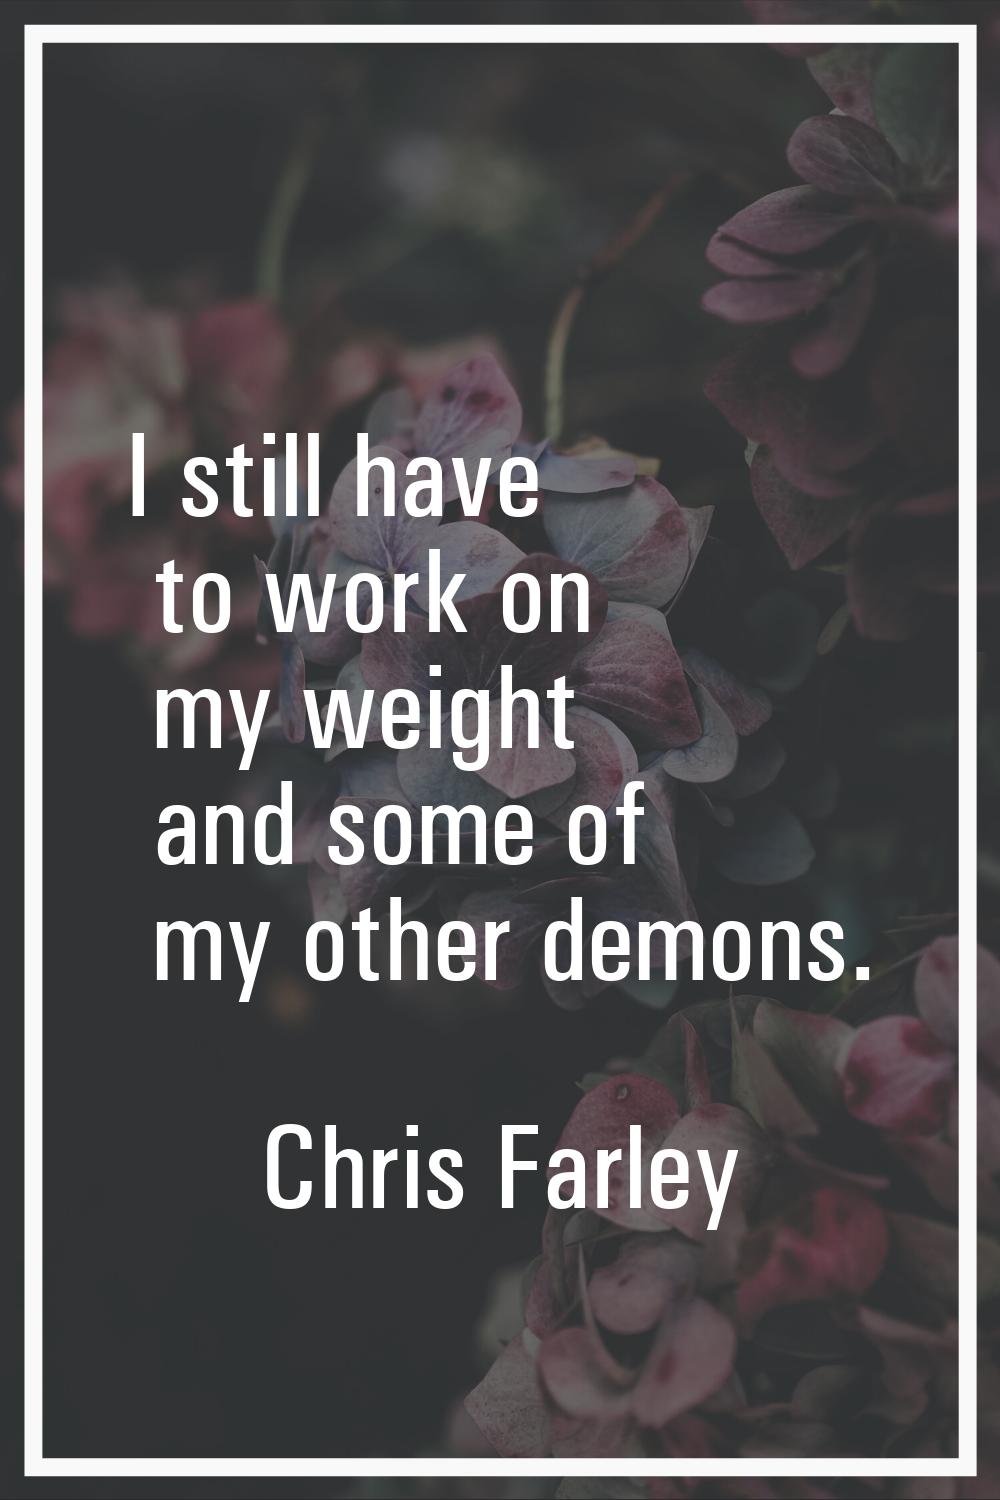 I still have to work on my weight and some of my other demons.